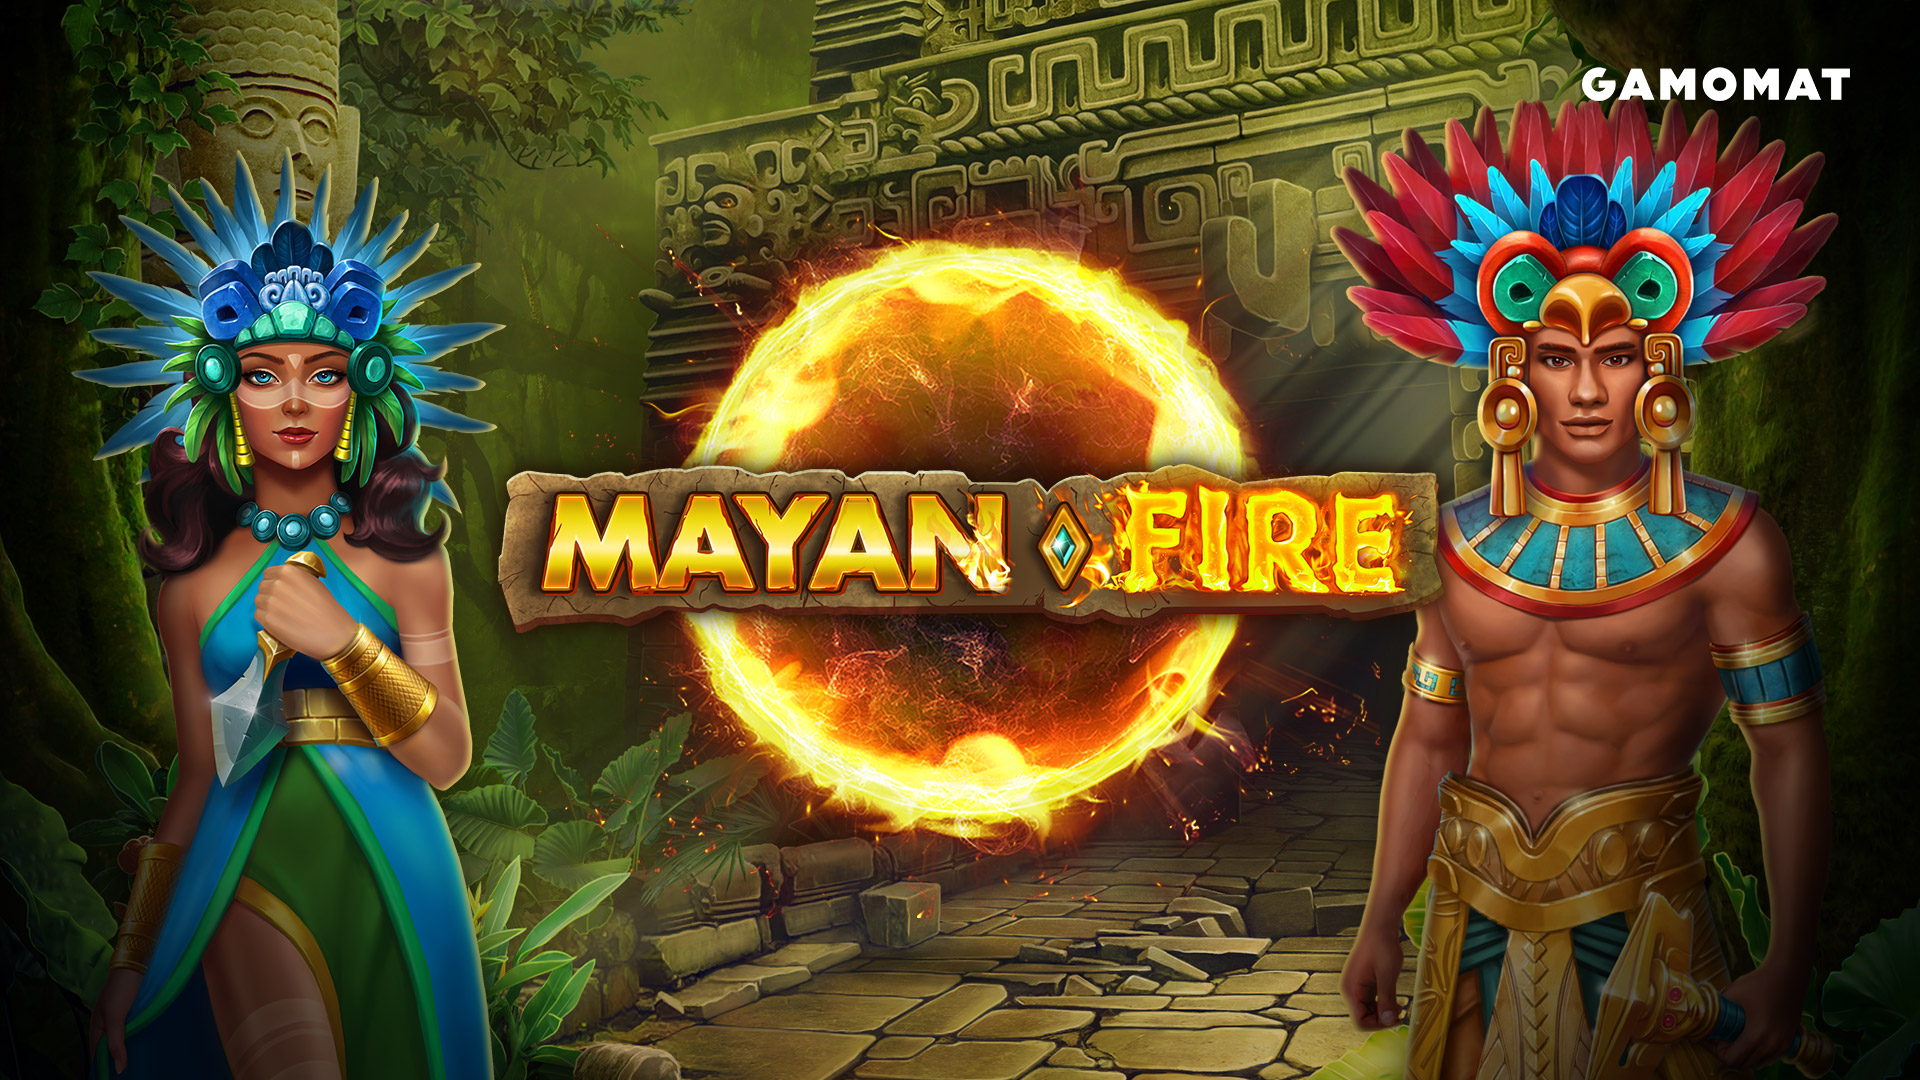 GAMOMAT launches its mighty Mayan Fire slot